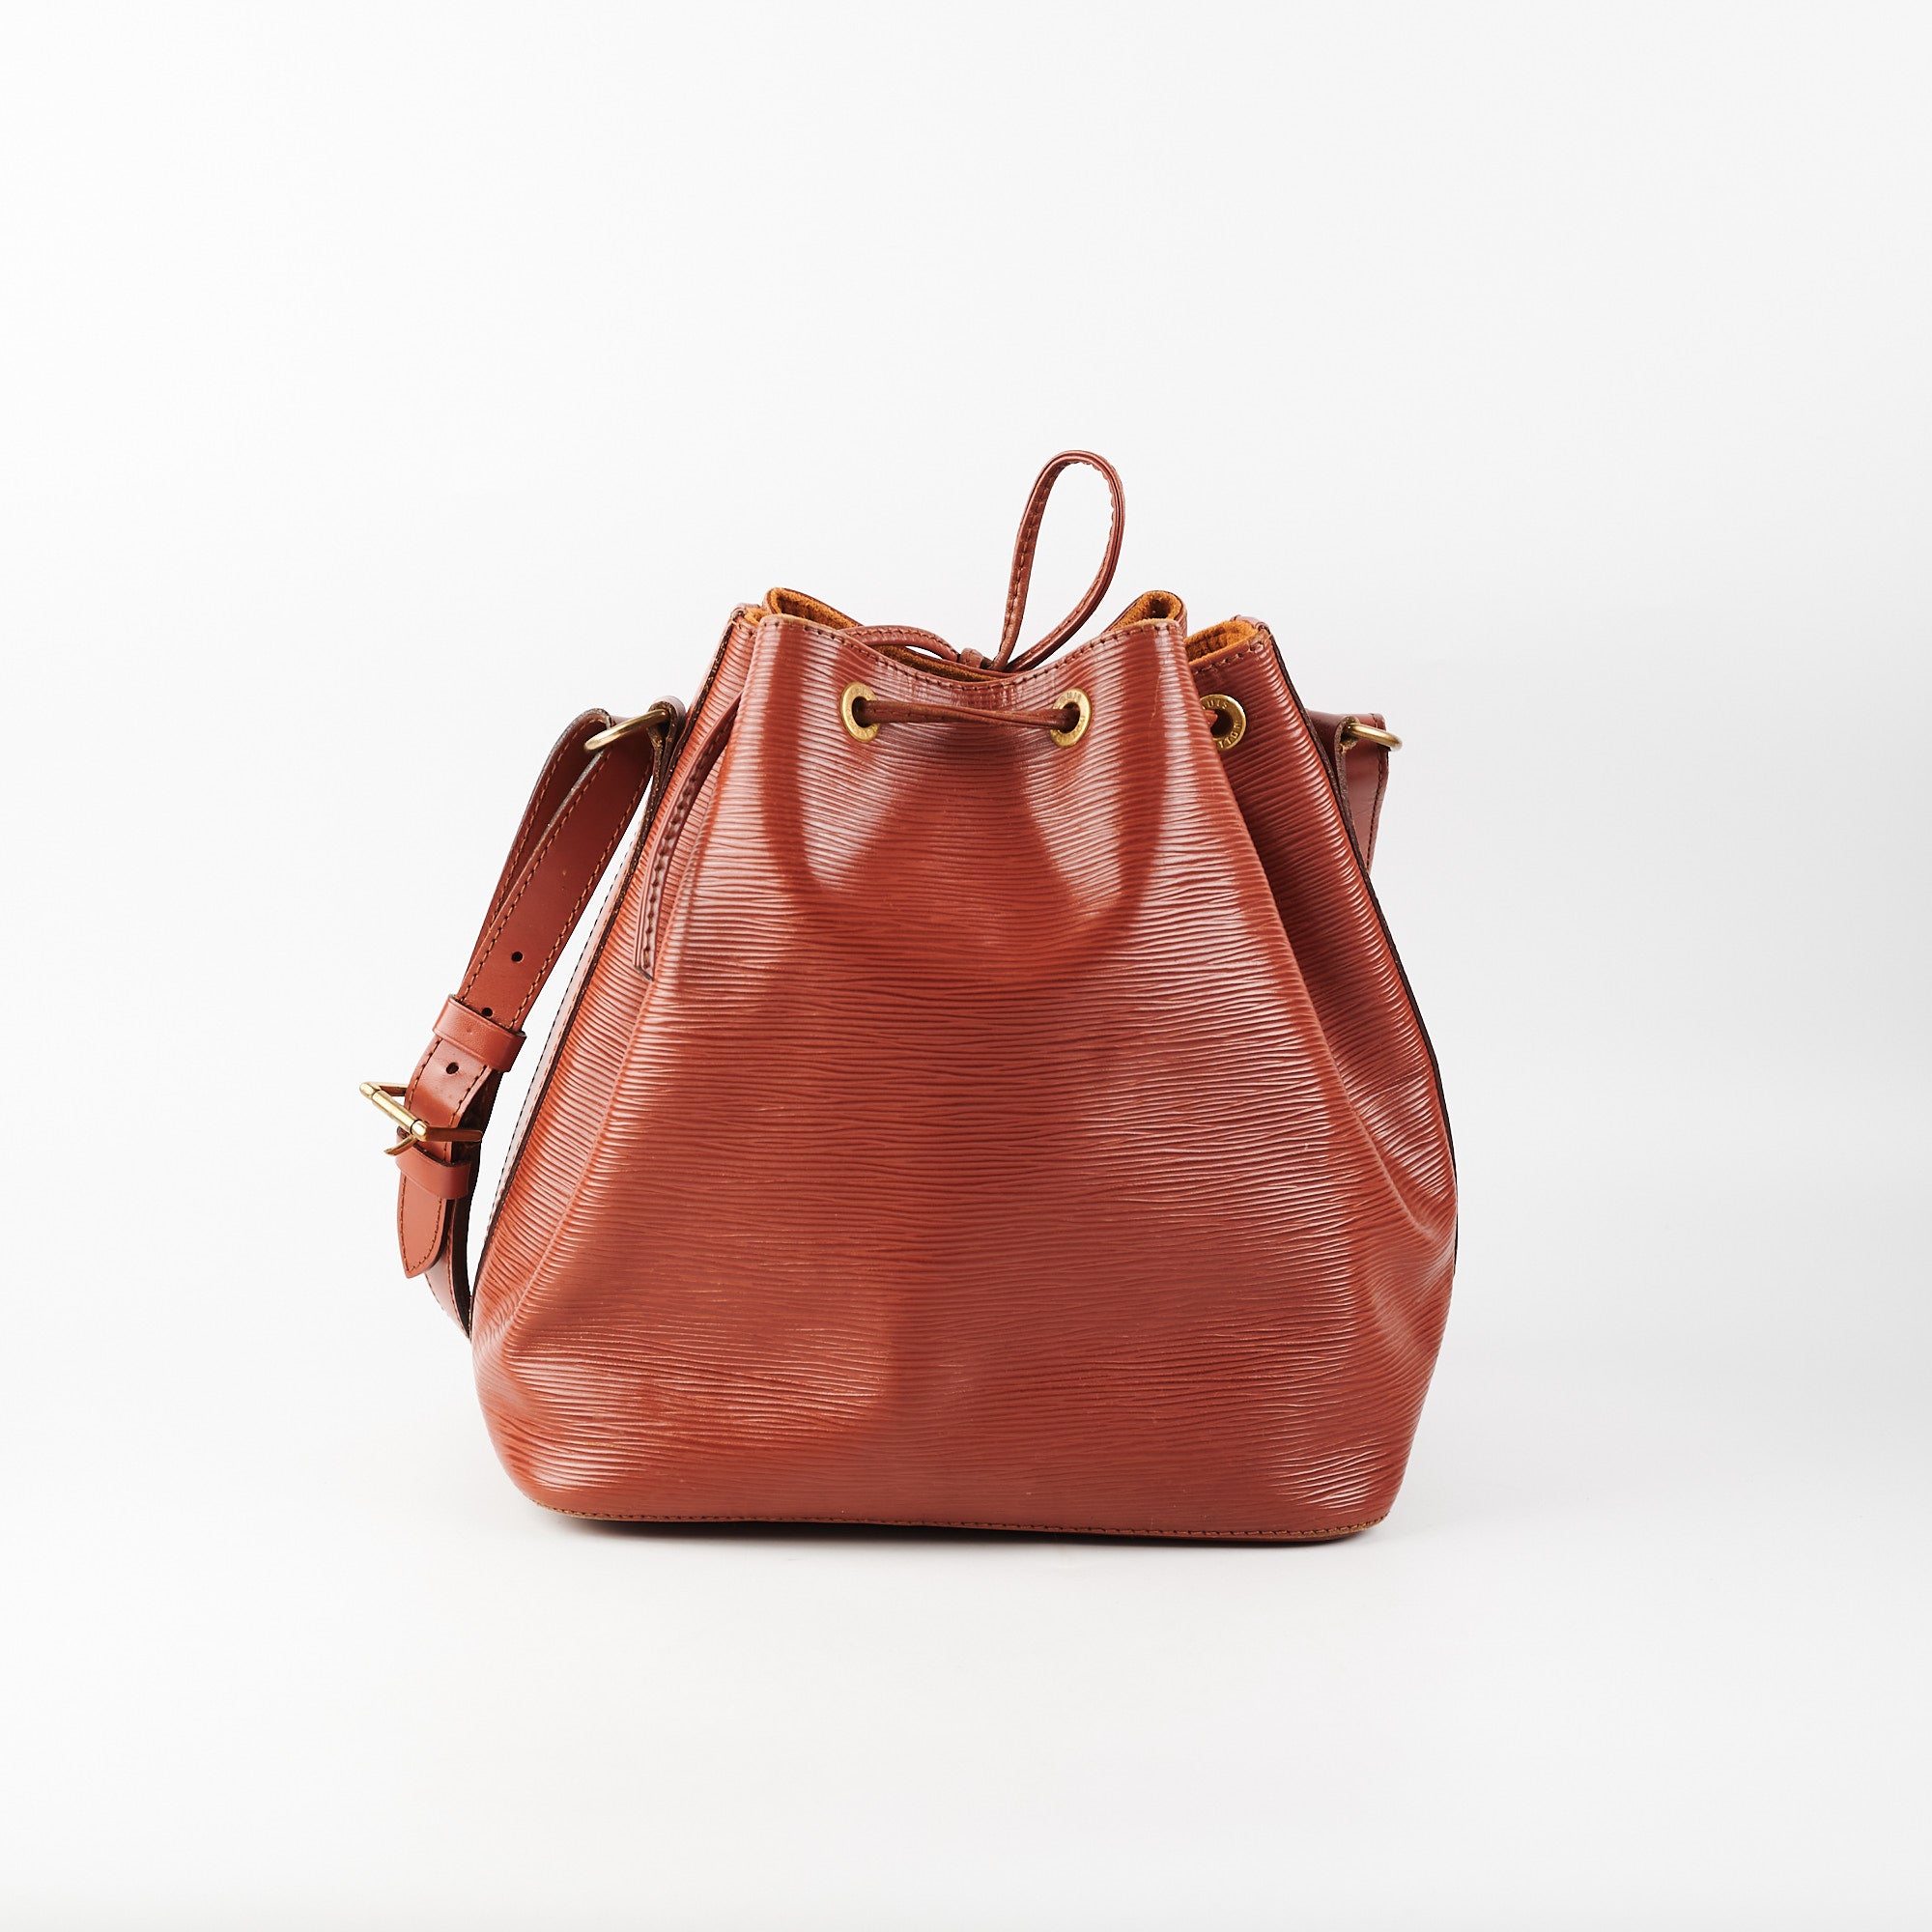 Louis Vuitton Neo Noe Epi Leather in Brown